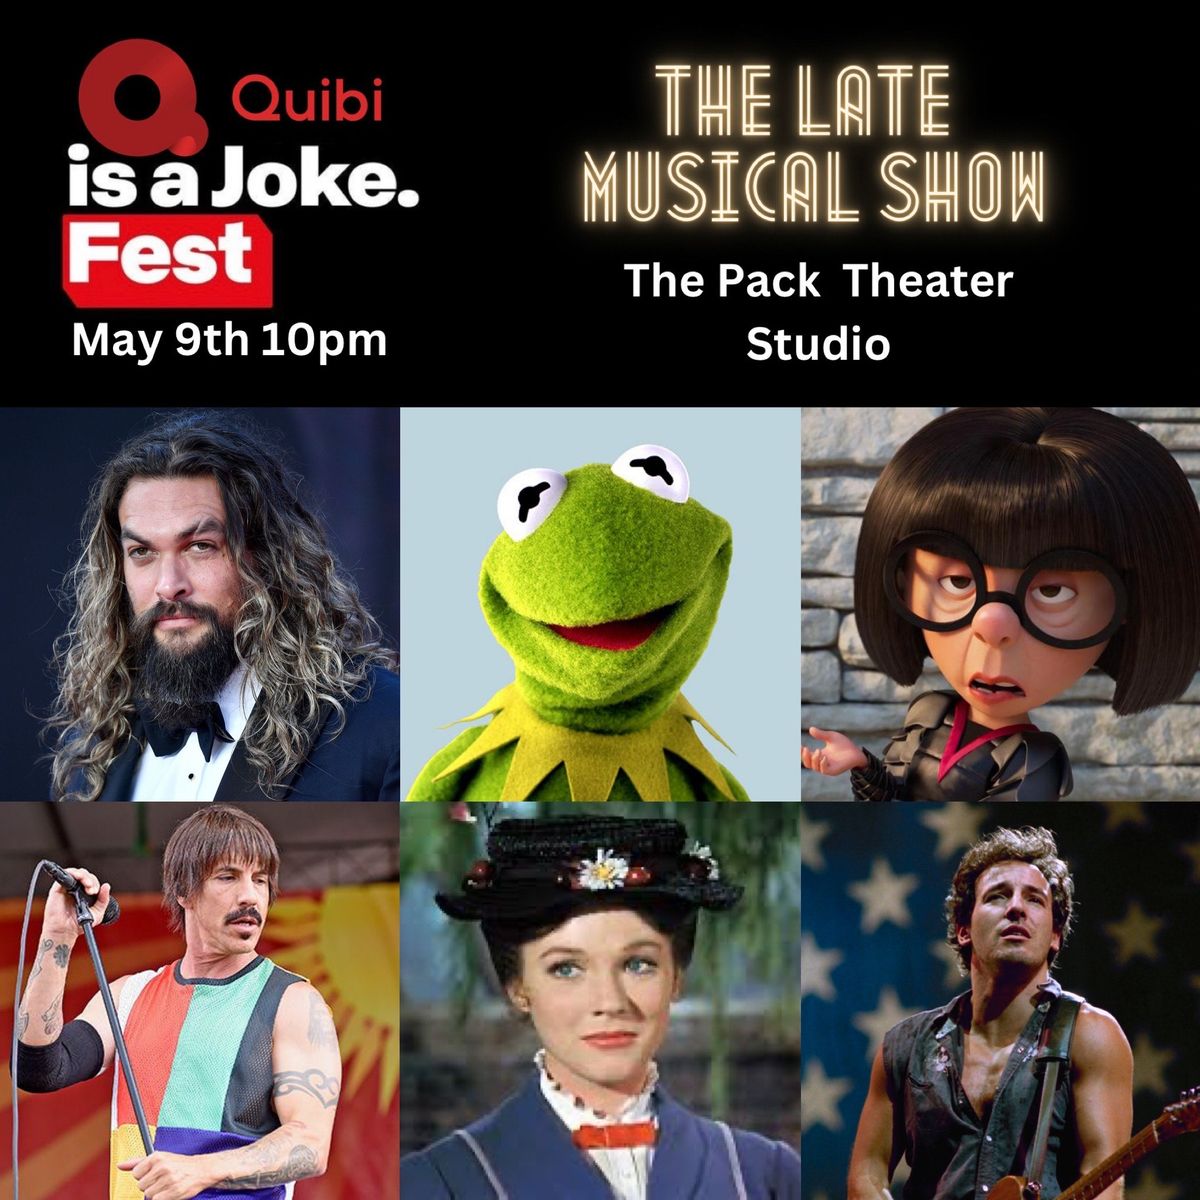 Kermit the Frog Hosts The Late Musical Show ~ May 9th 10pm